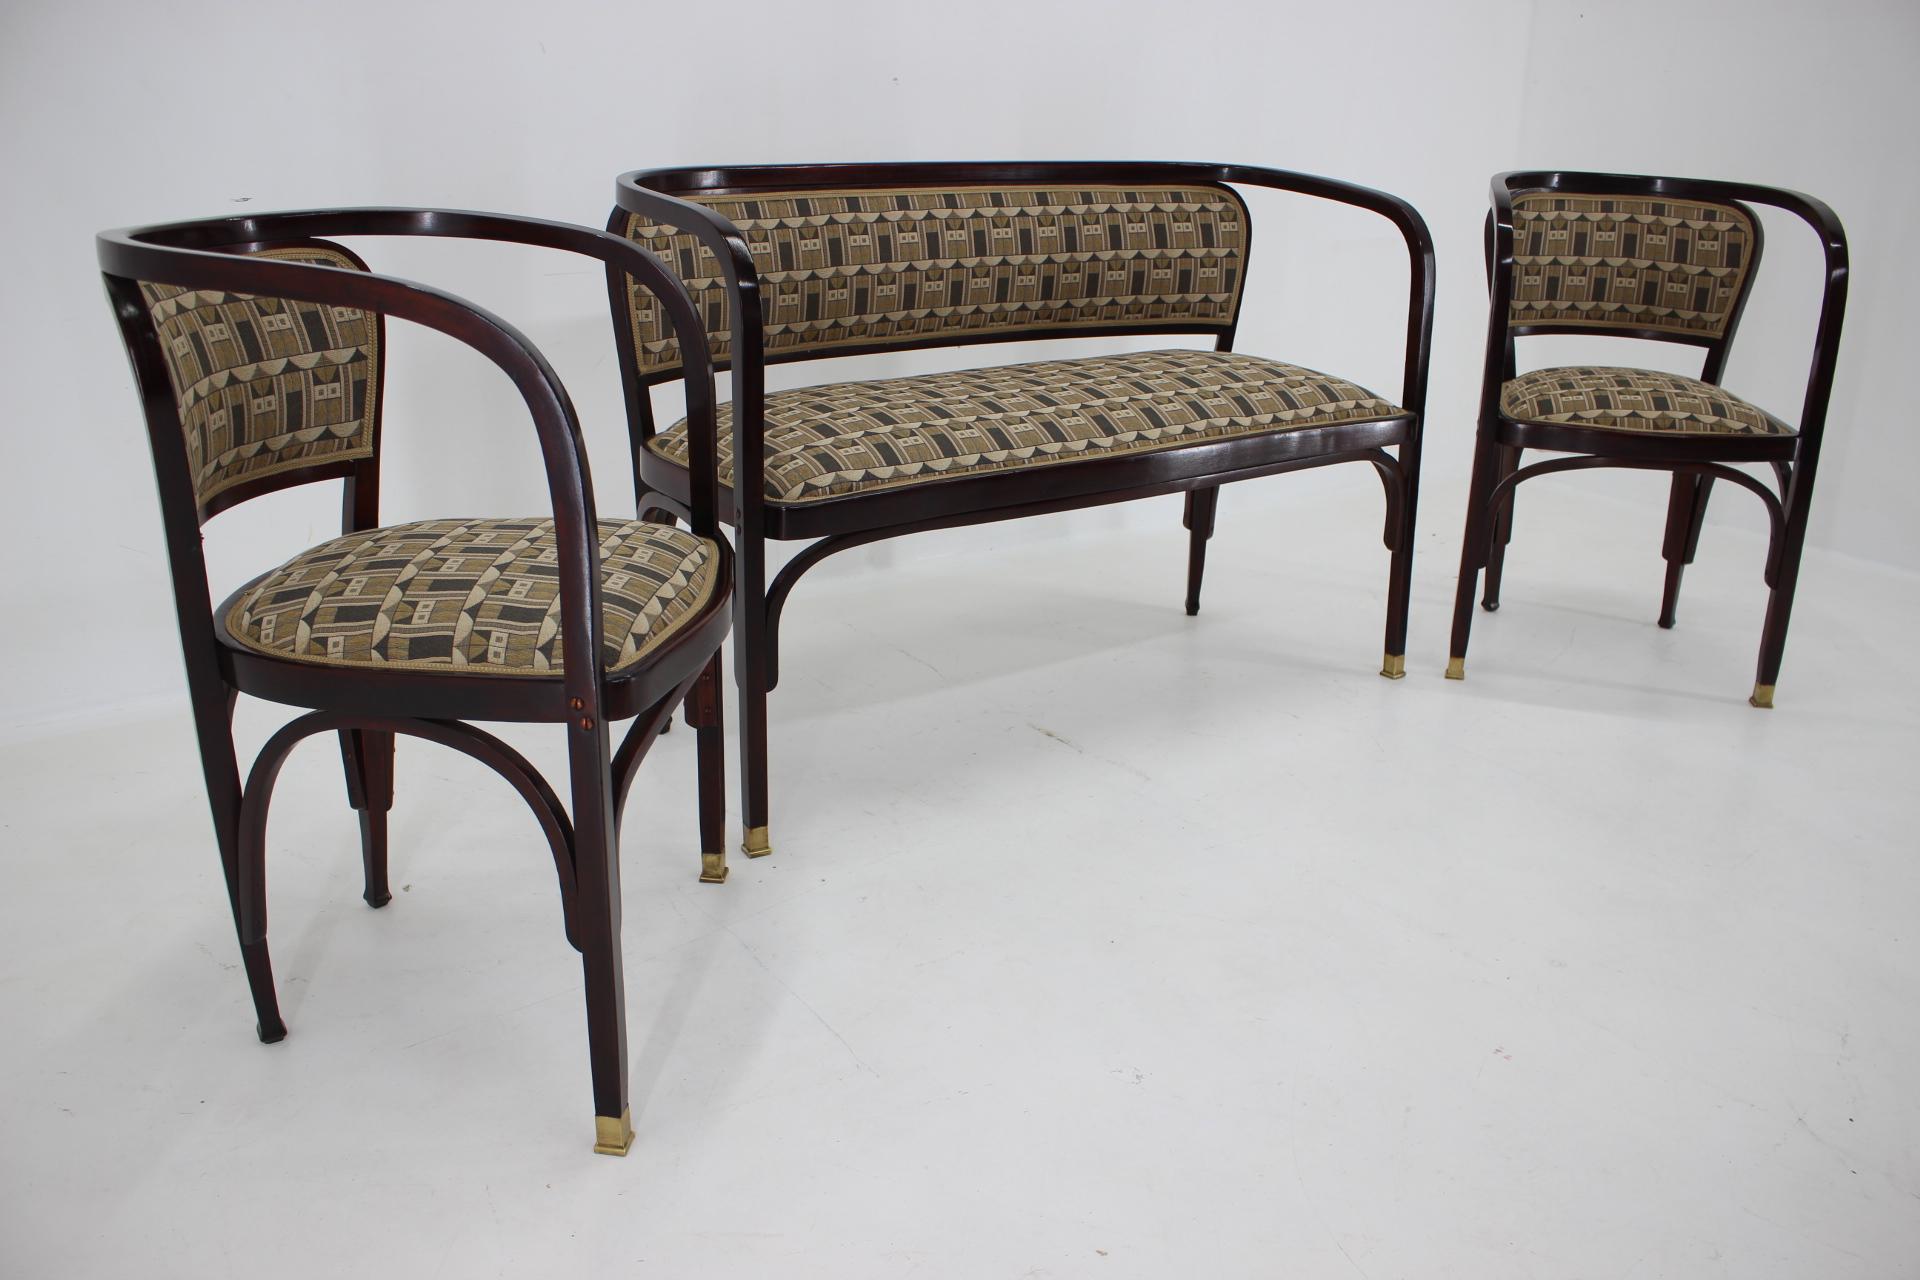 Austrian Secession Sofa and Two Armchairs by Gustav Siegel for J.J.Kohn, Restored 